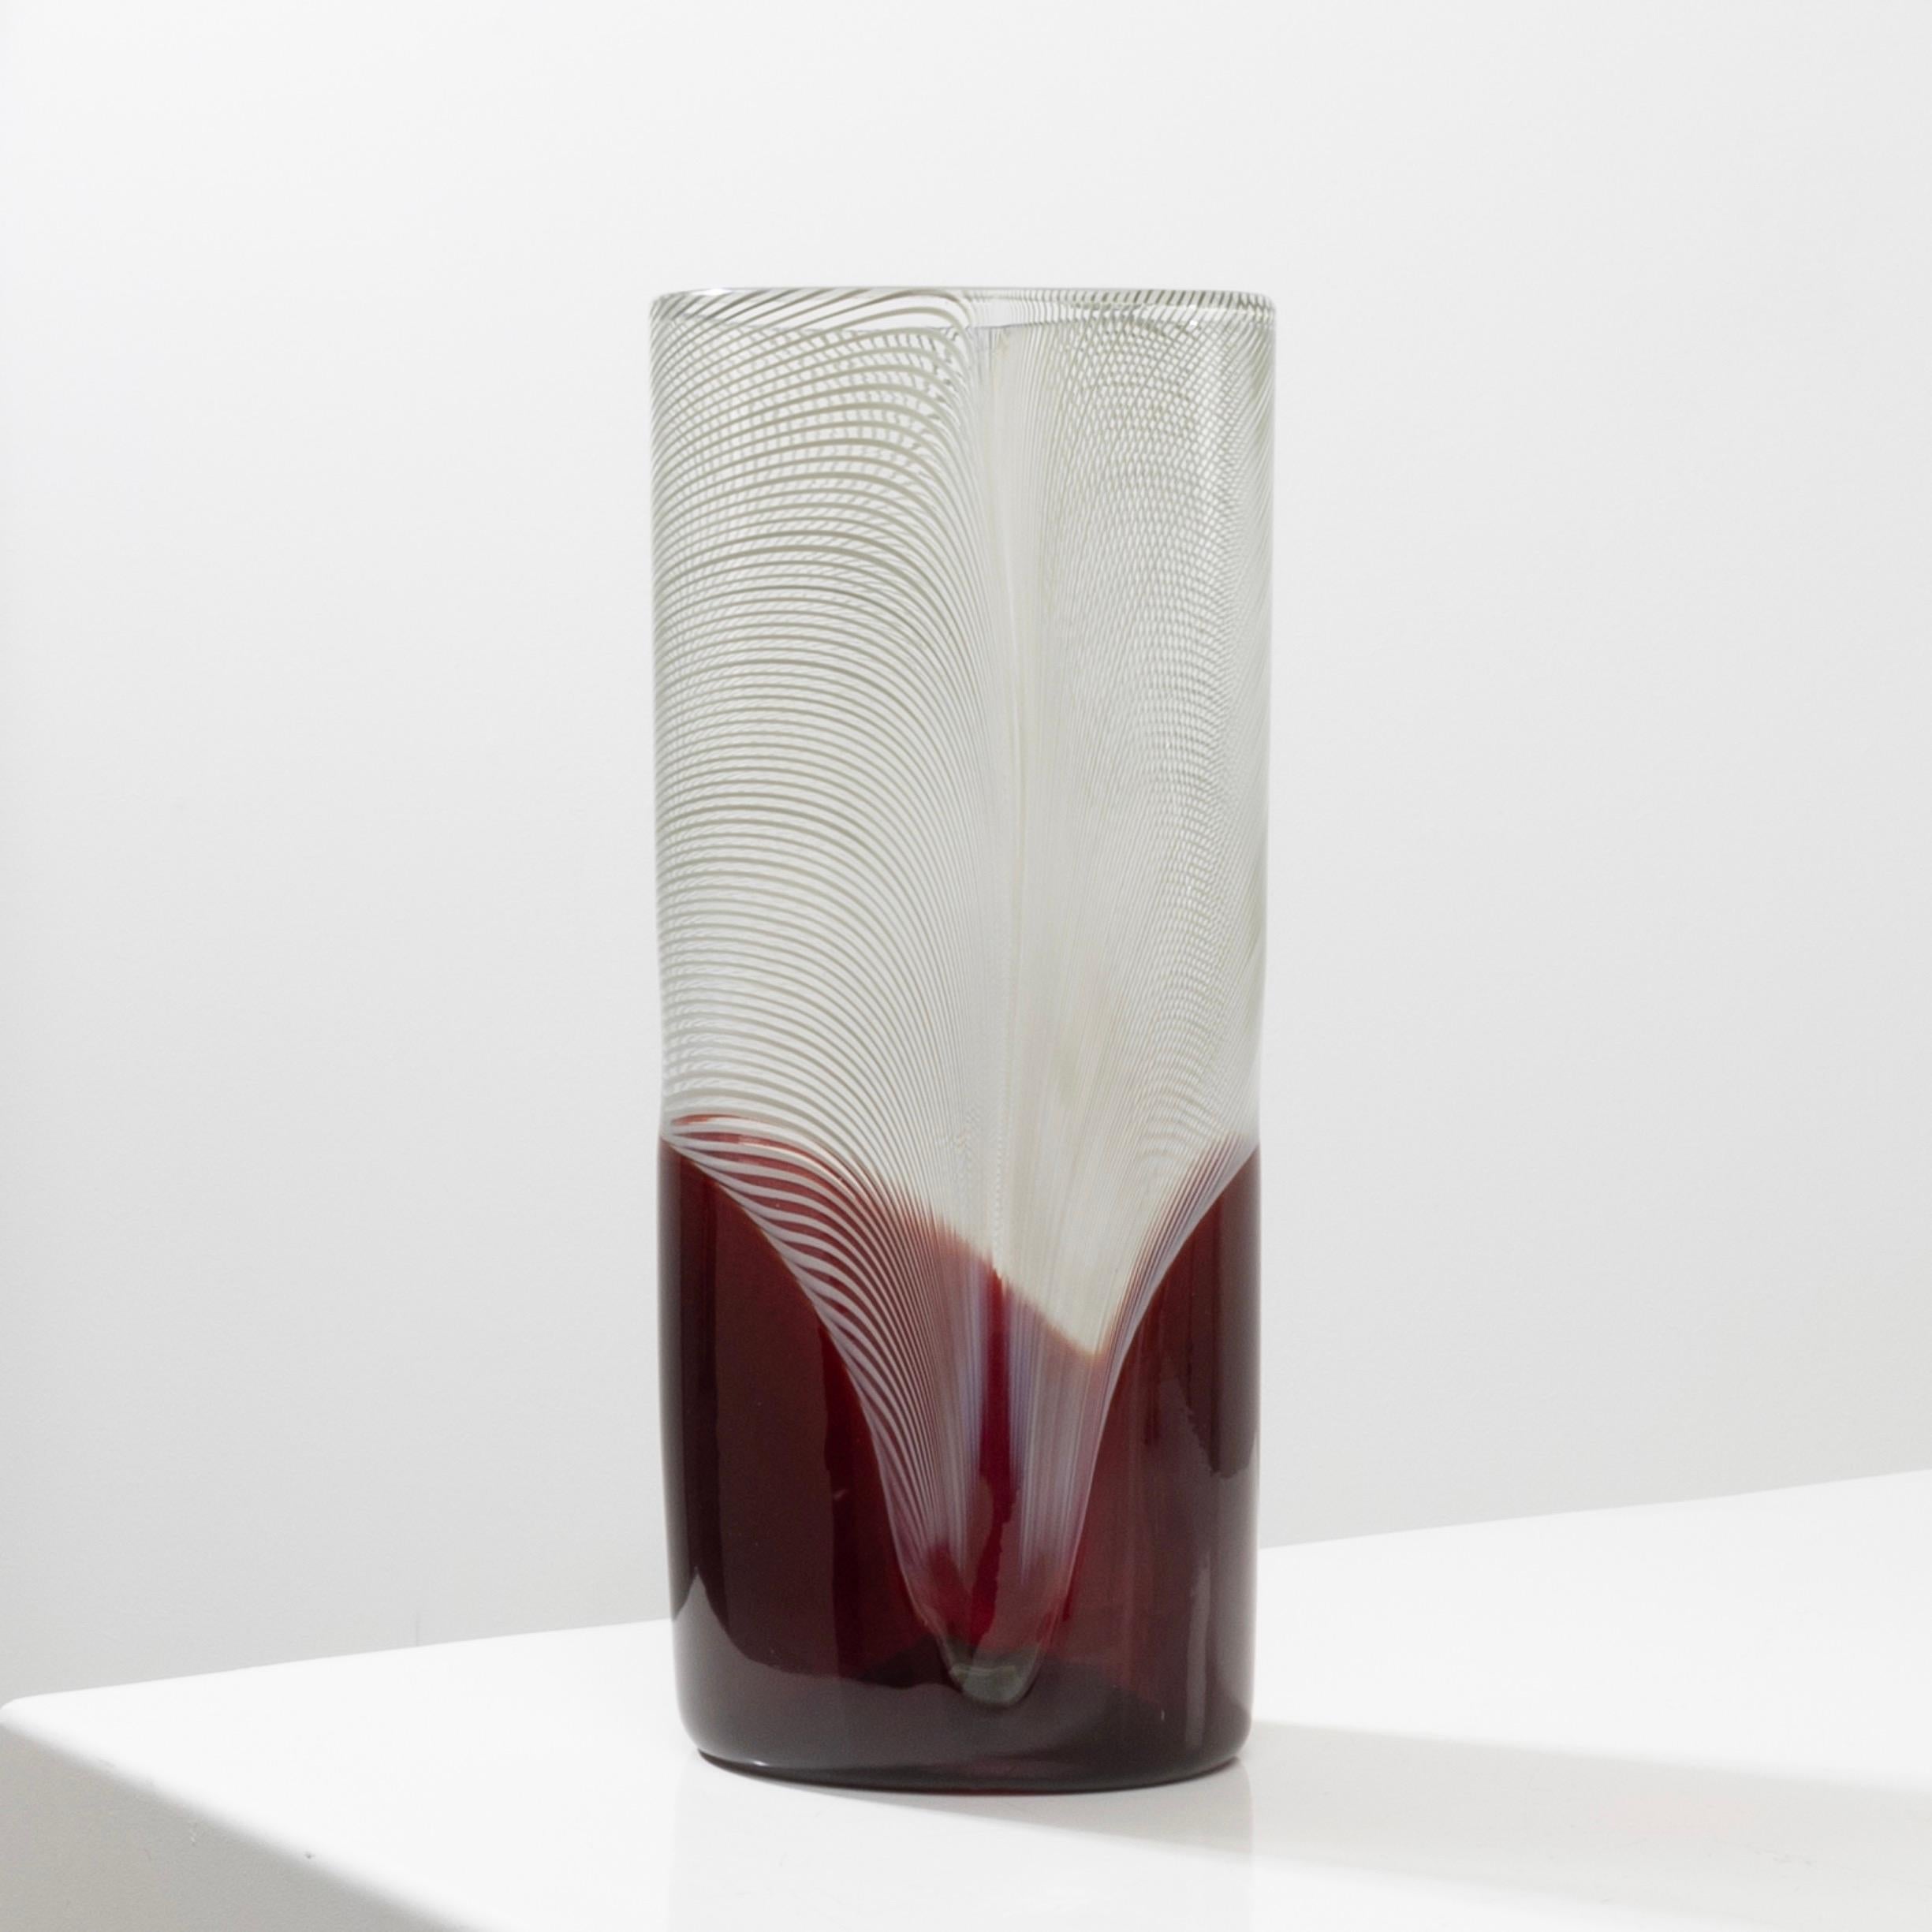 Pavoni by Tapio Wirkkala – High blown Murano glass vase
Pavoni by Tapio Wirkkala, high blown Murano glass vase.
Vase with an oval cross section.
Decor in filigrana over red glass.
A vase from the latest series designed by the artist for Venini